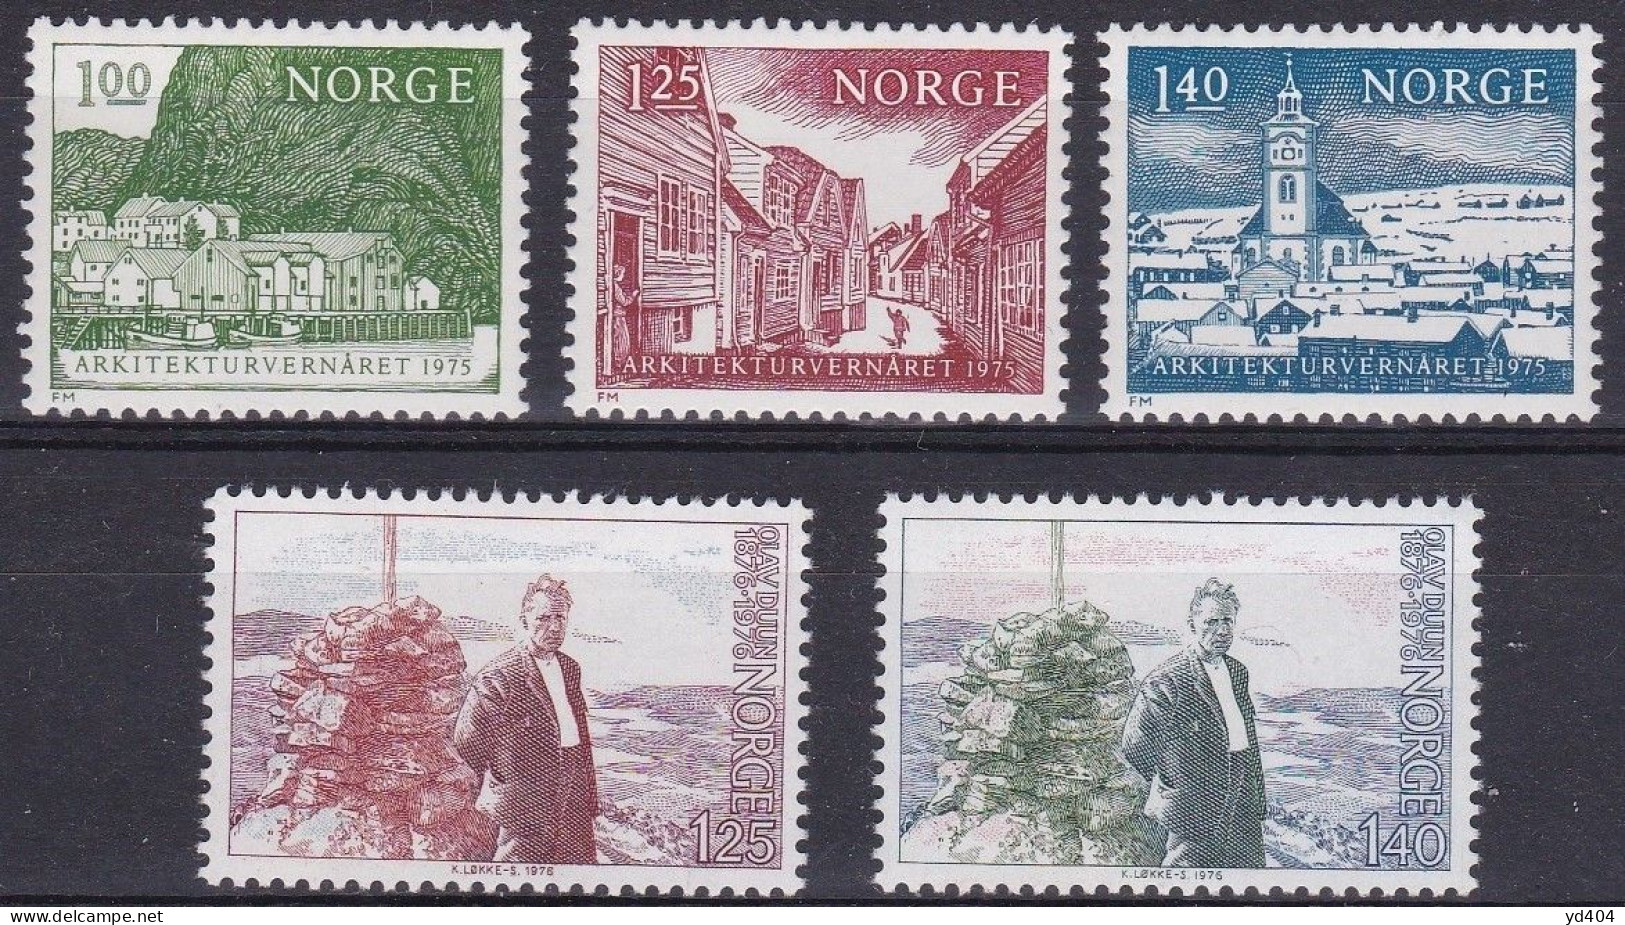 NO237C– NORVEGE - NORWAY 1975-76 – ARCITECTURE & O. DUUN - Y&T # 656687 MNH 5,25 € - Unused Stamps